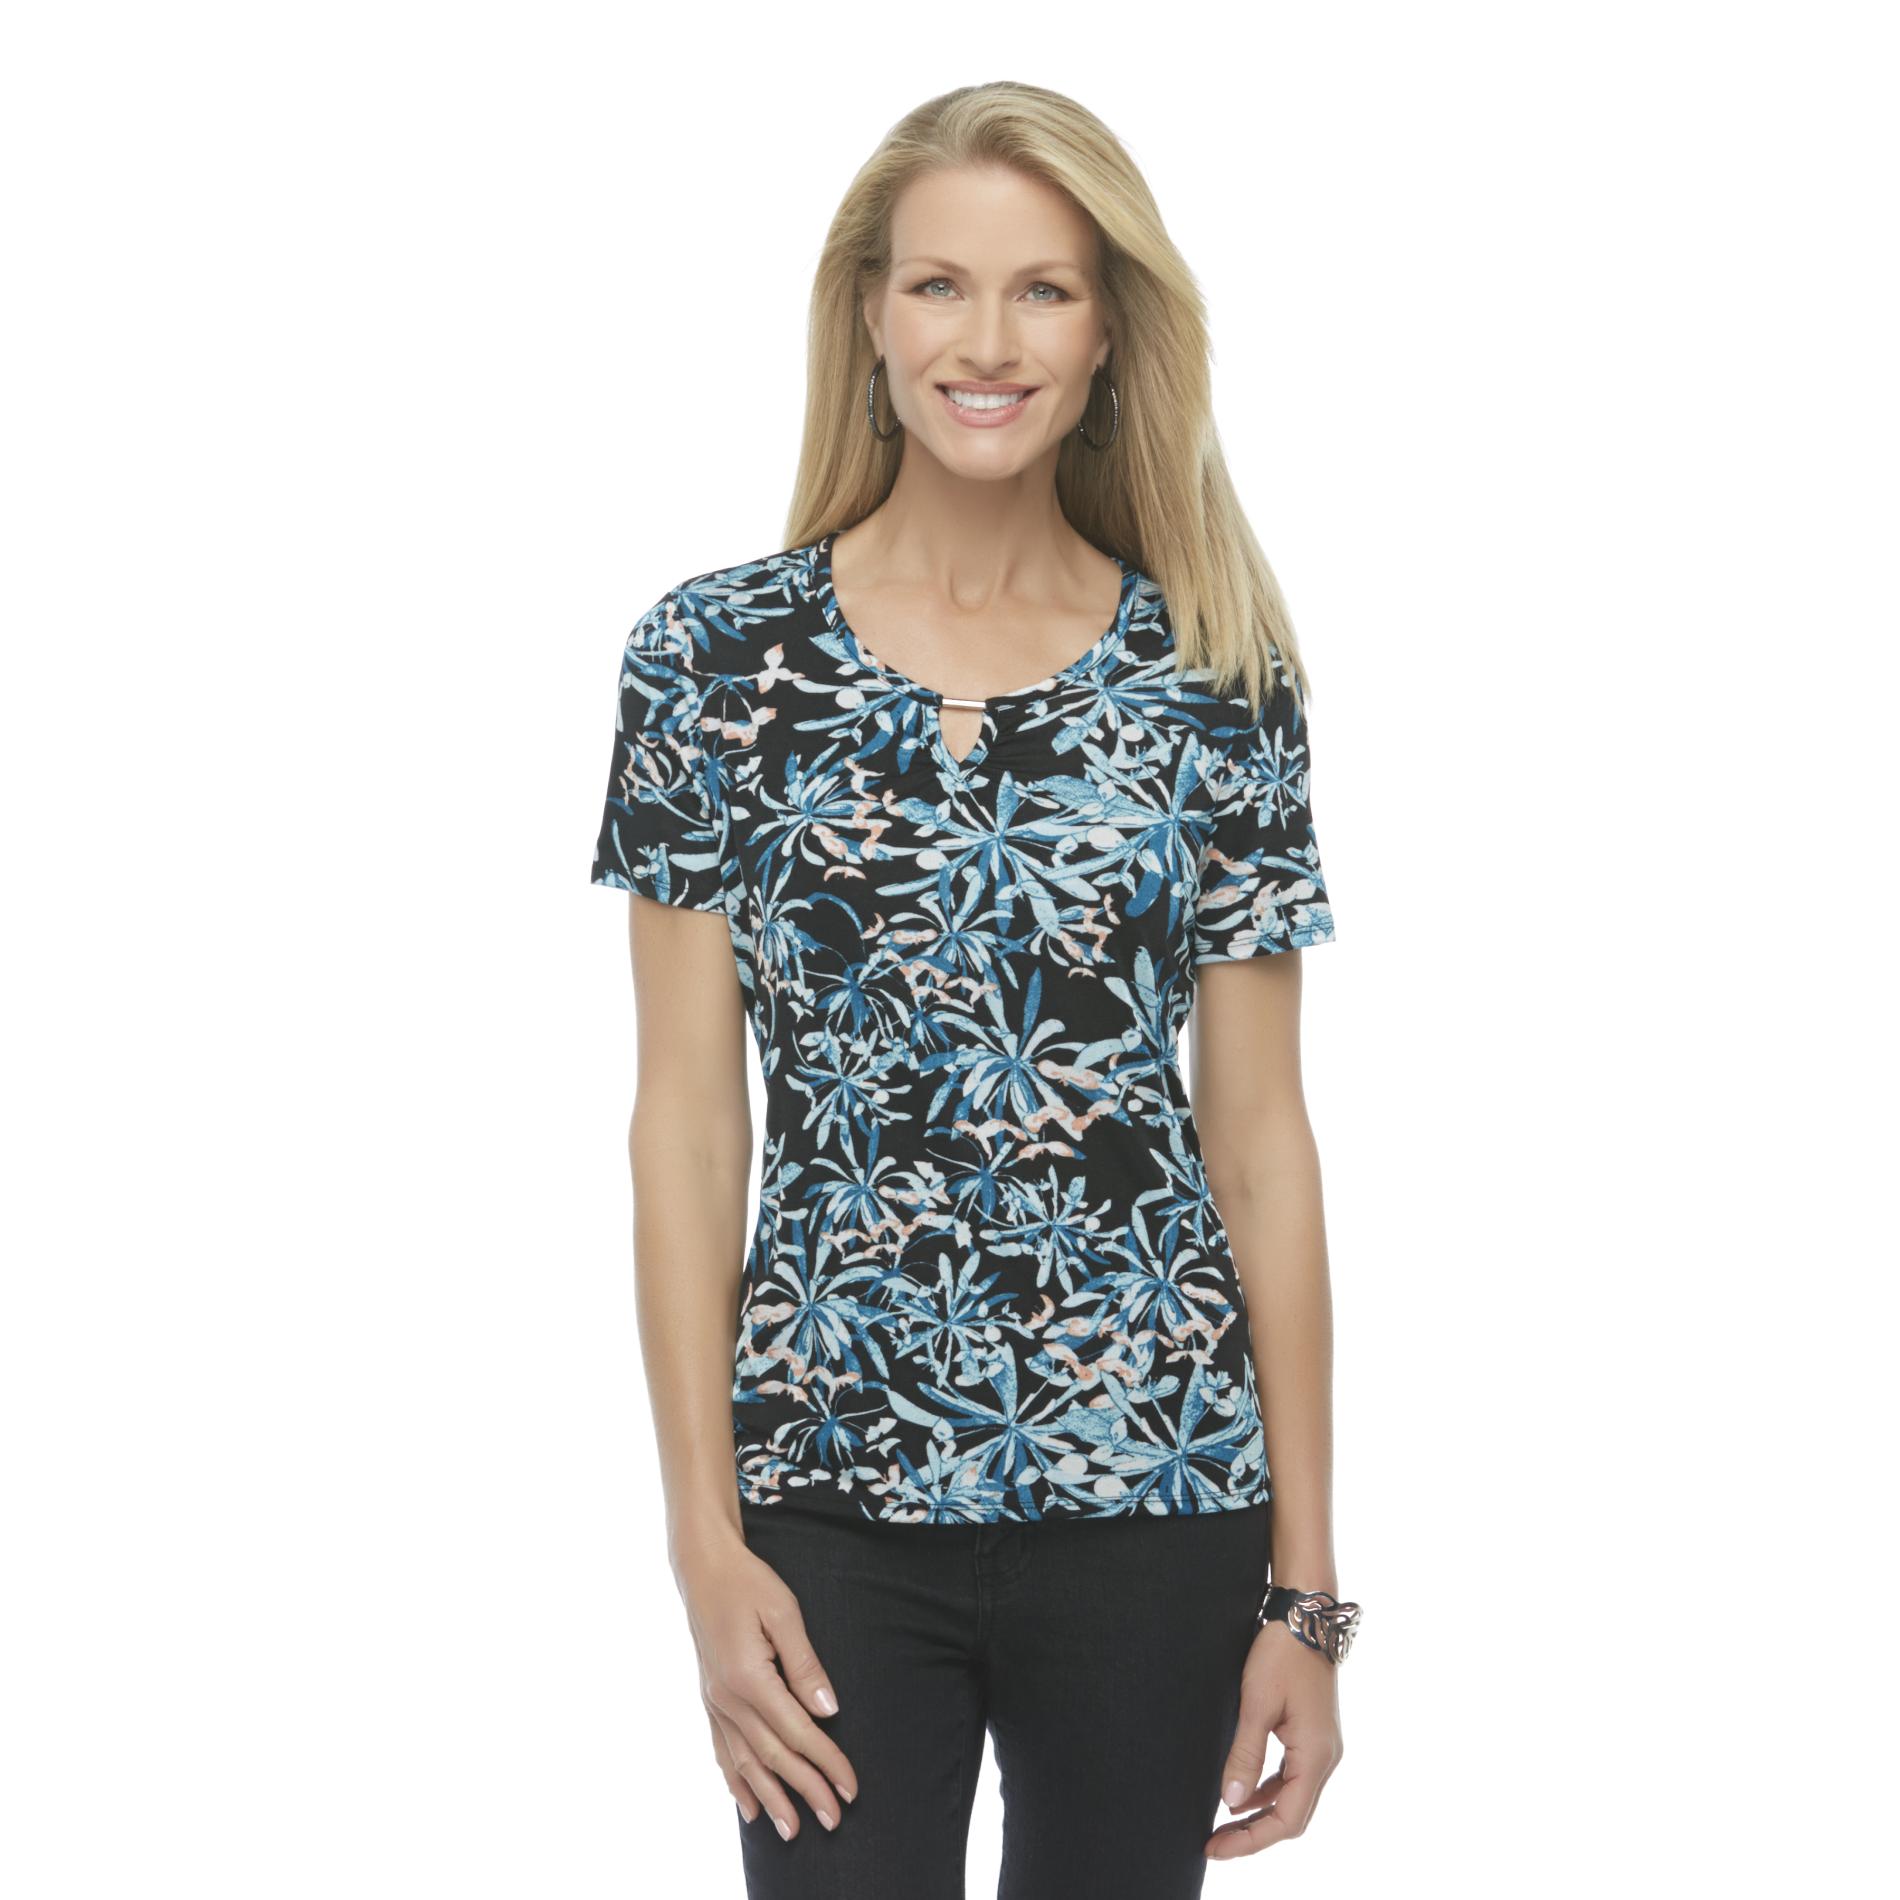 Jaclyn Smith Women's Keyhole Top - Floral Print